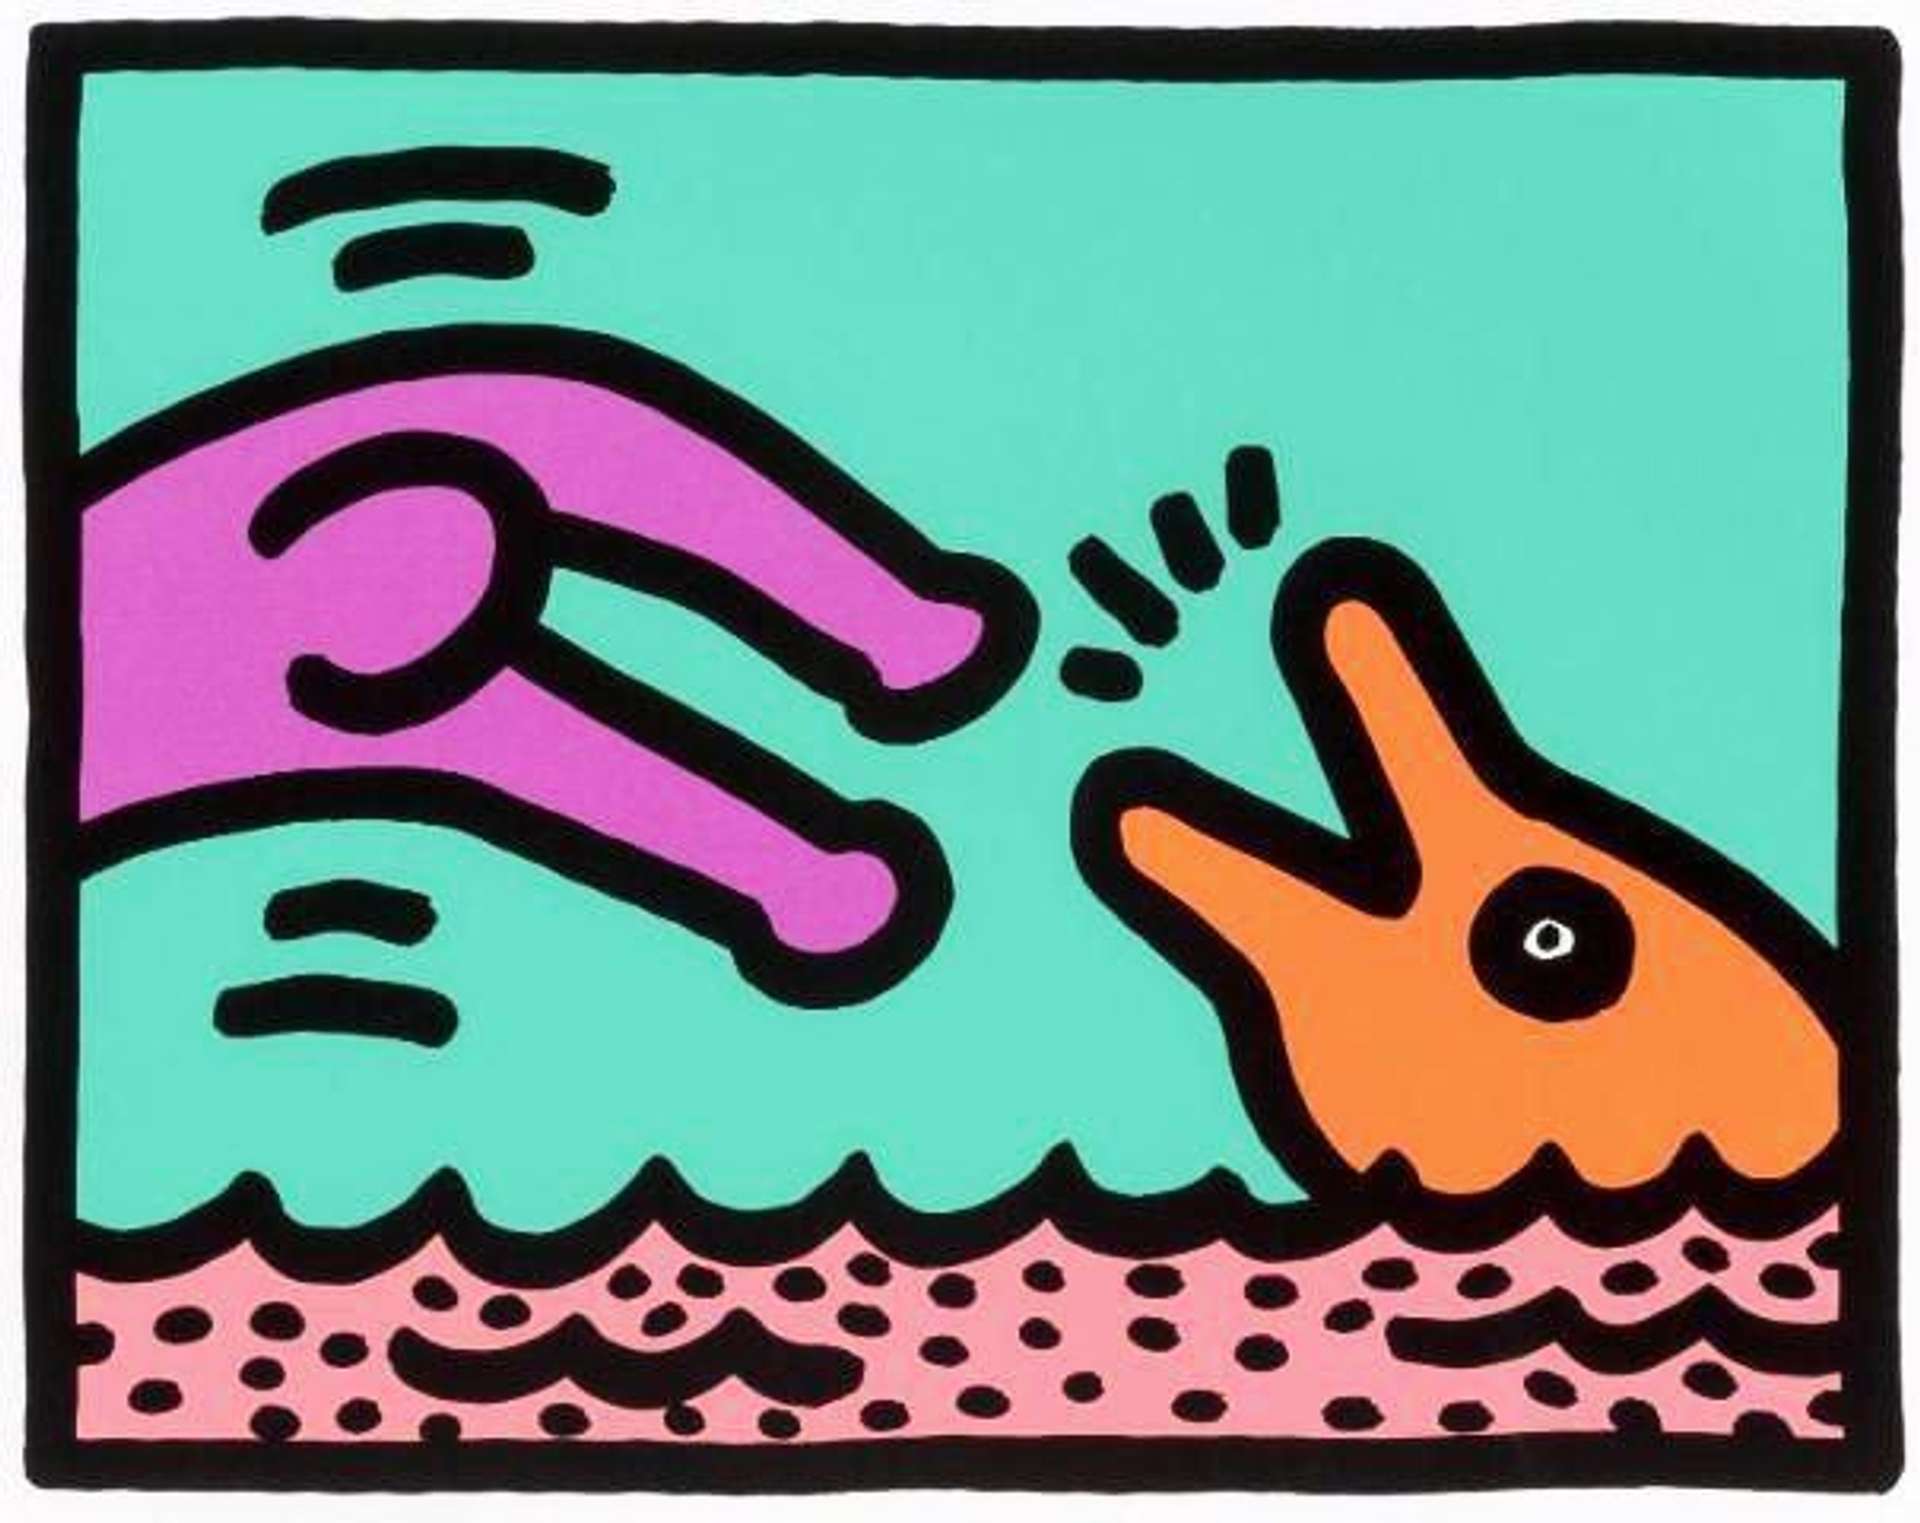 Keith Haring’s Pop Shop V, Plate I. A Pop Art screenprint of a purple animated figure diving into a pink sea next to an orange dolphin.